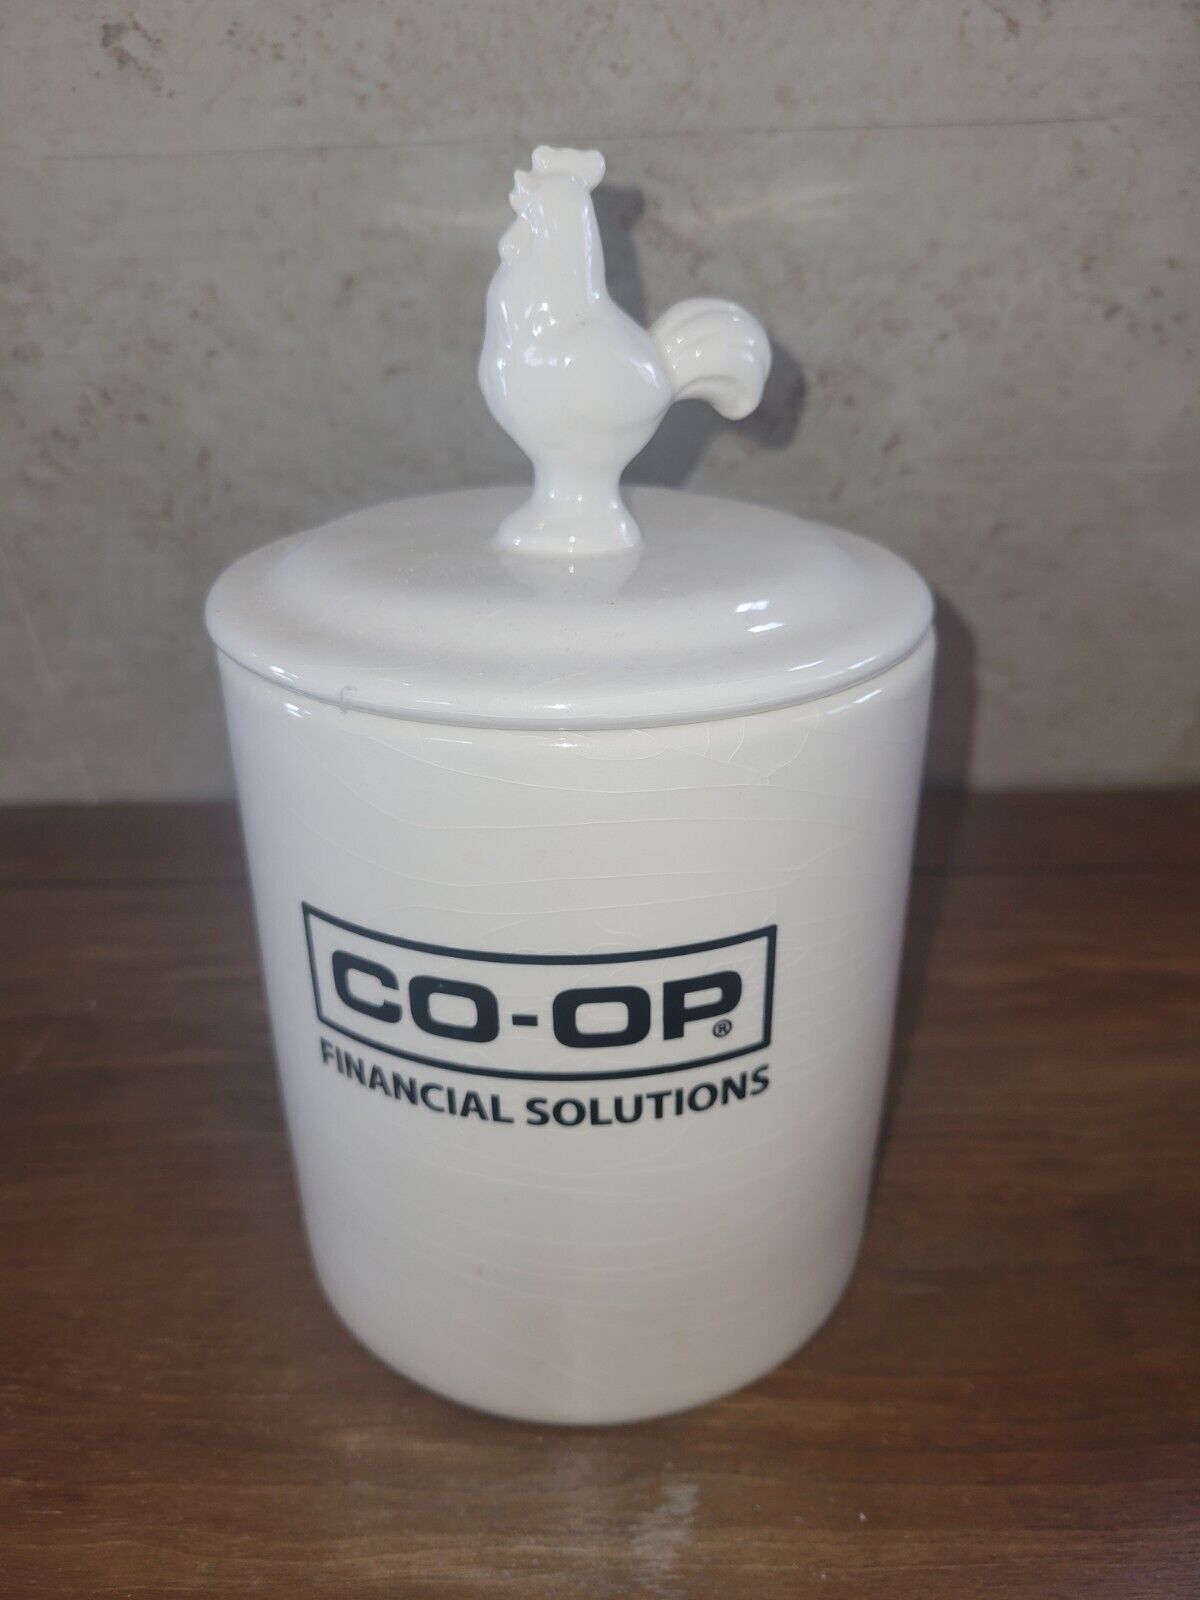 Vintage White Co-op Financial Solutions Cookie Jar With Rooster Lid